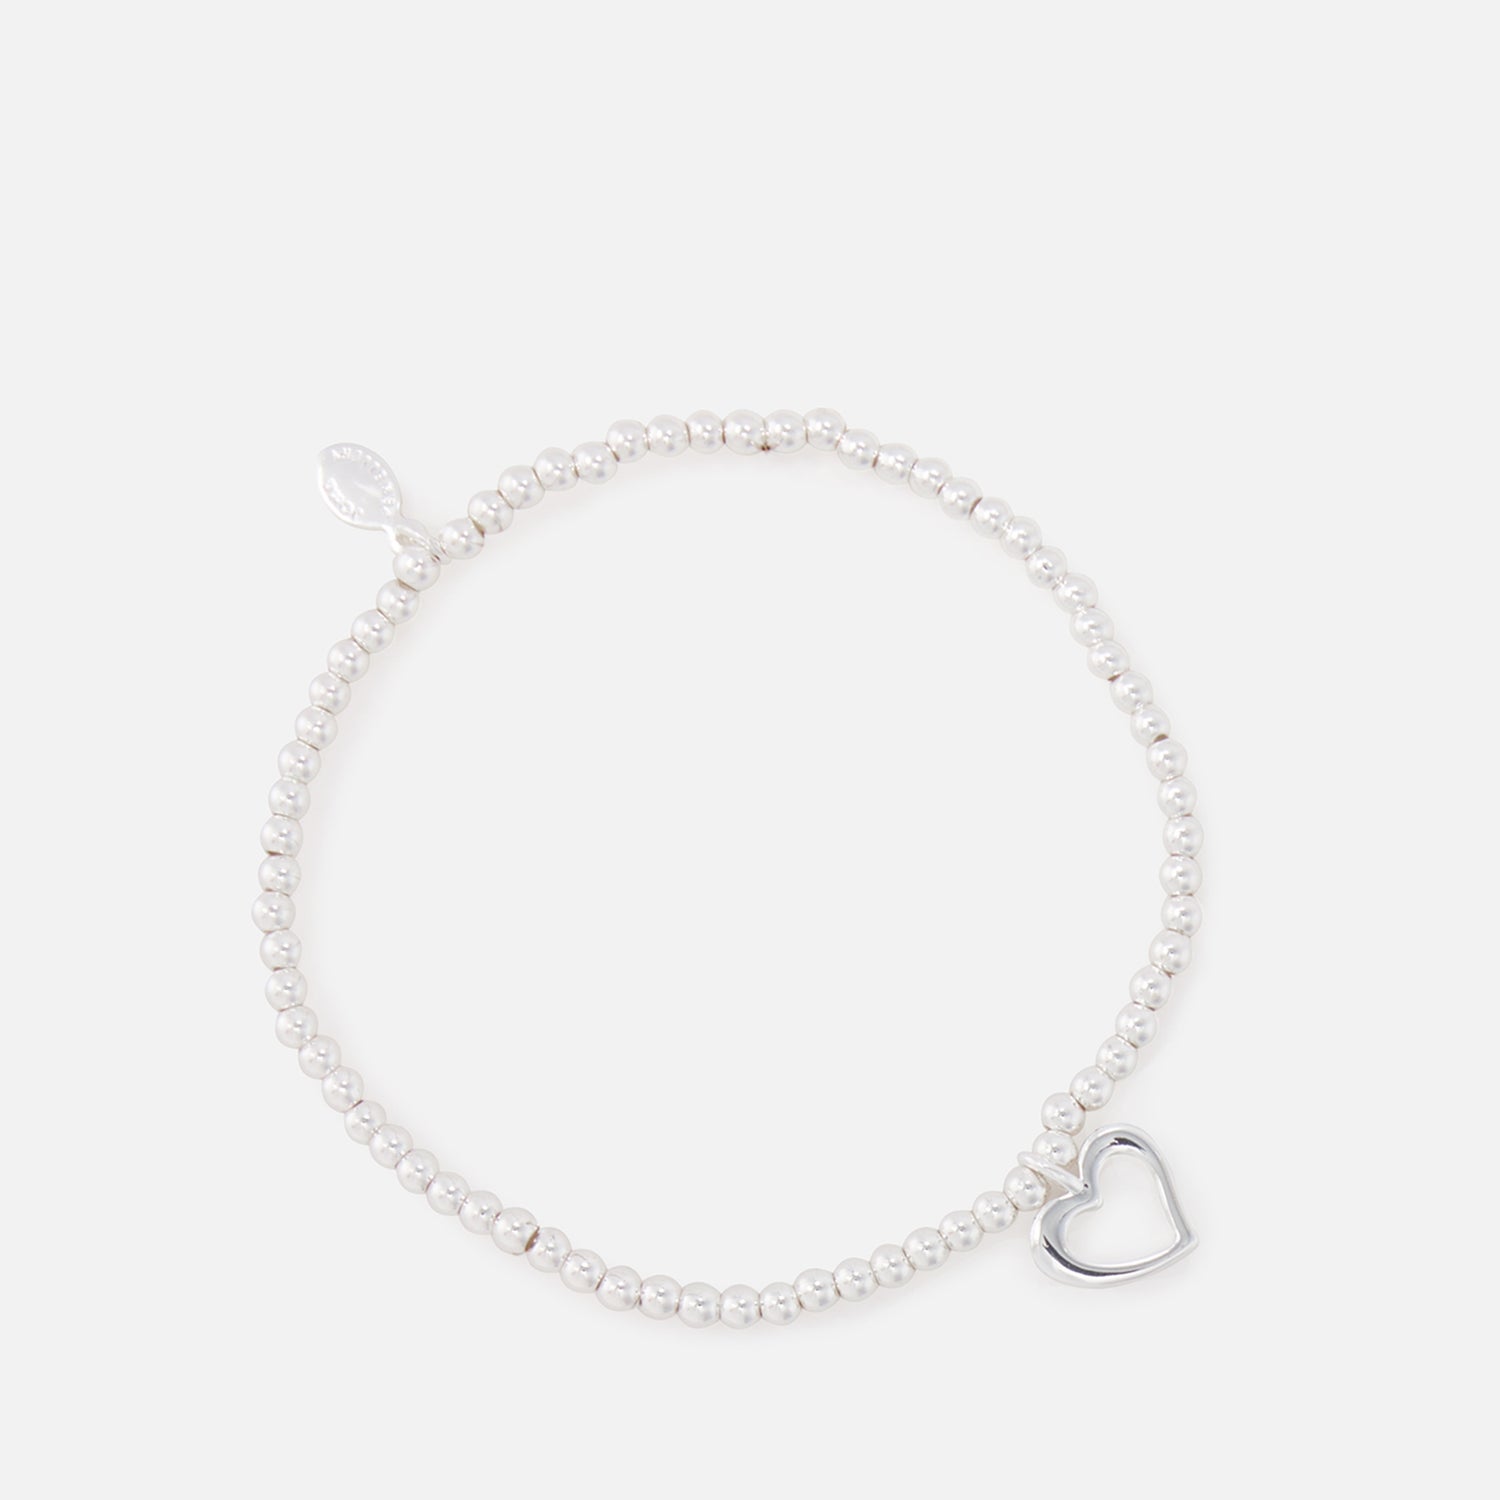 Joma Jewellery From The Heart Gift Box Love You Mum Silver-Tone Bracelet